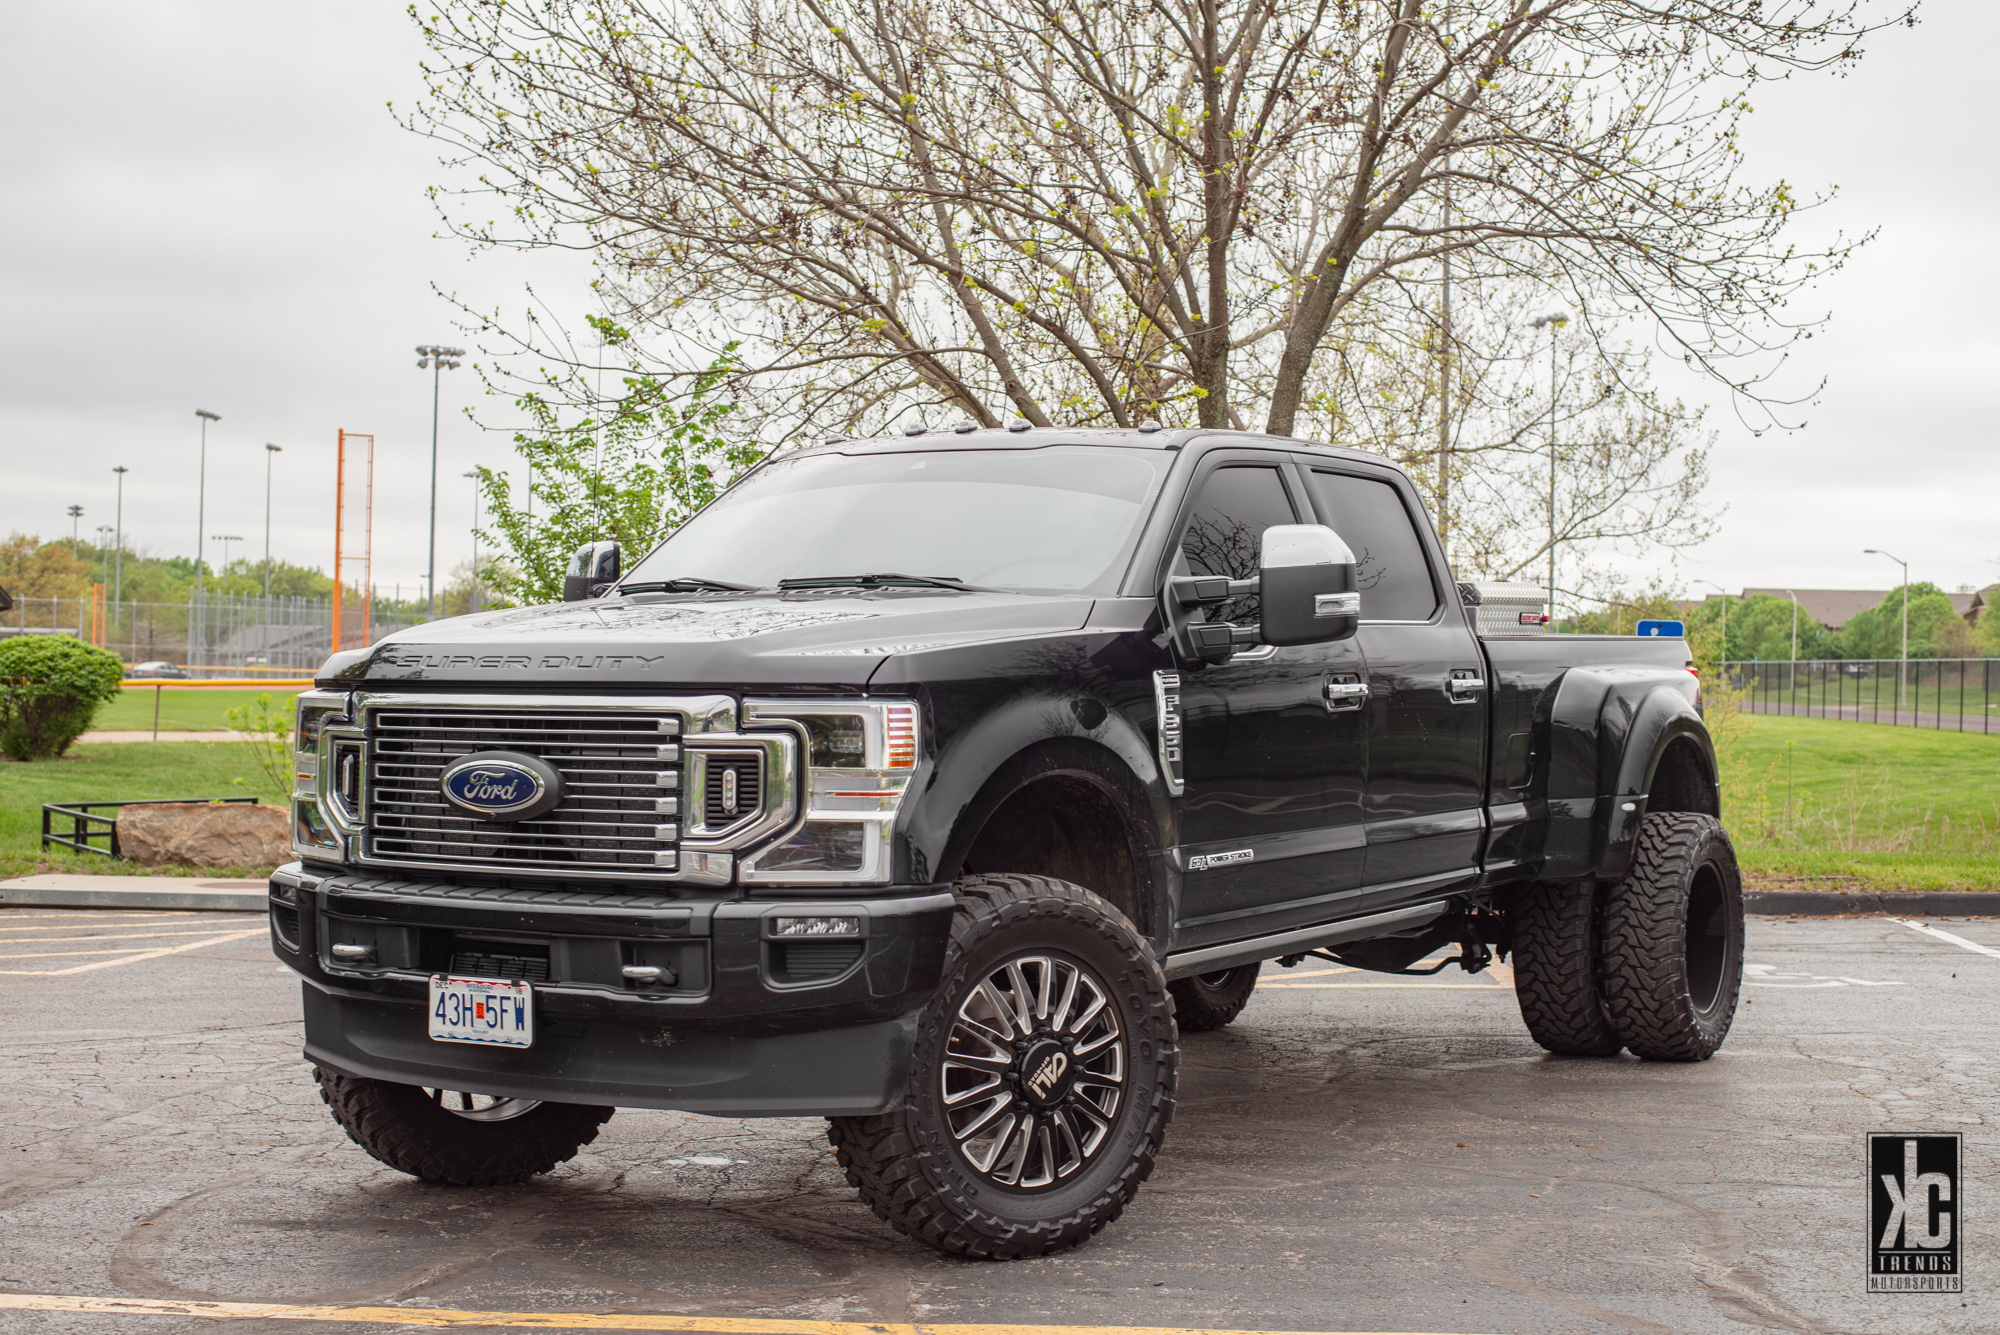  Ford F-350 Super Duty with Cali Offroad Summit Dually